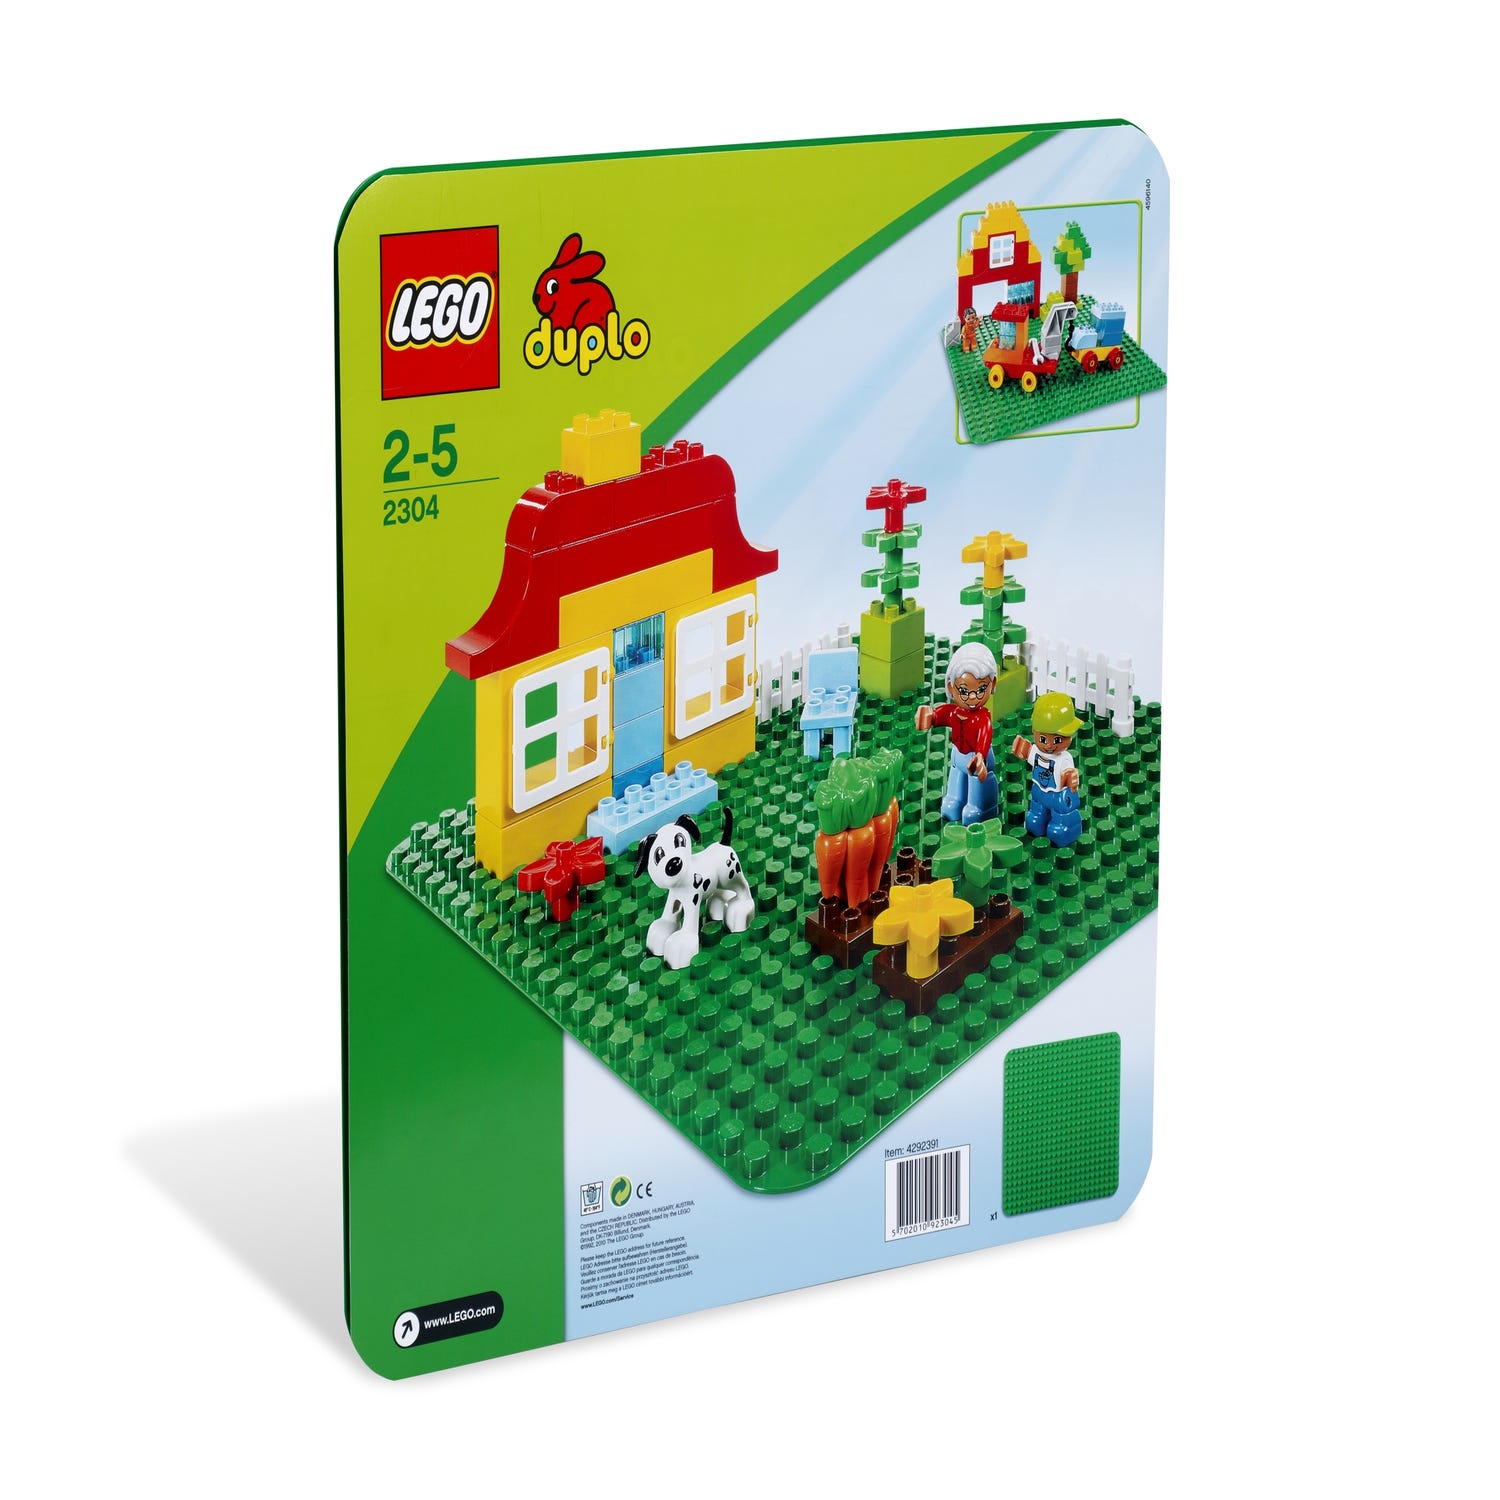 LEGO® DUPLO® Green Baseplate 2304 | DUPLO® | Buy online at the Official Shop US